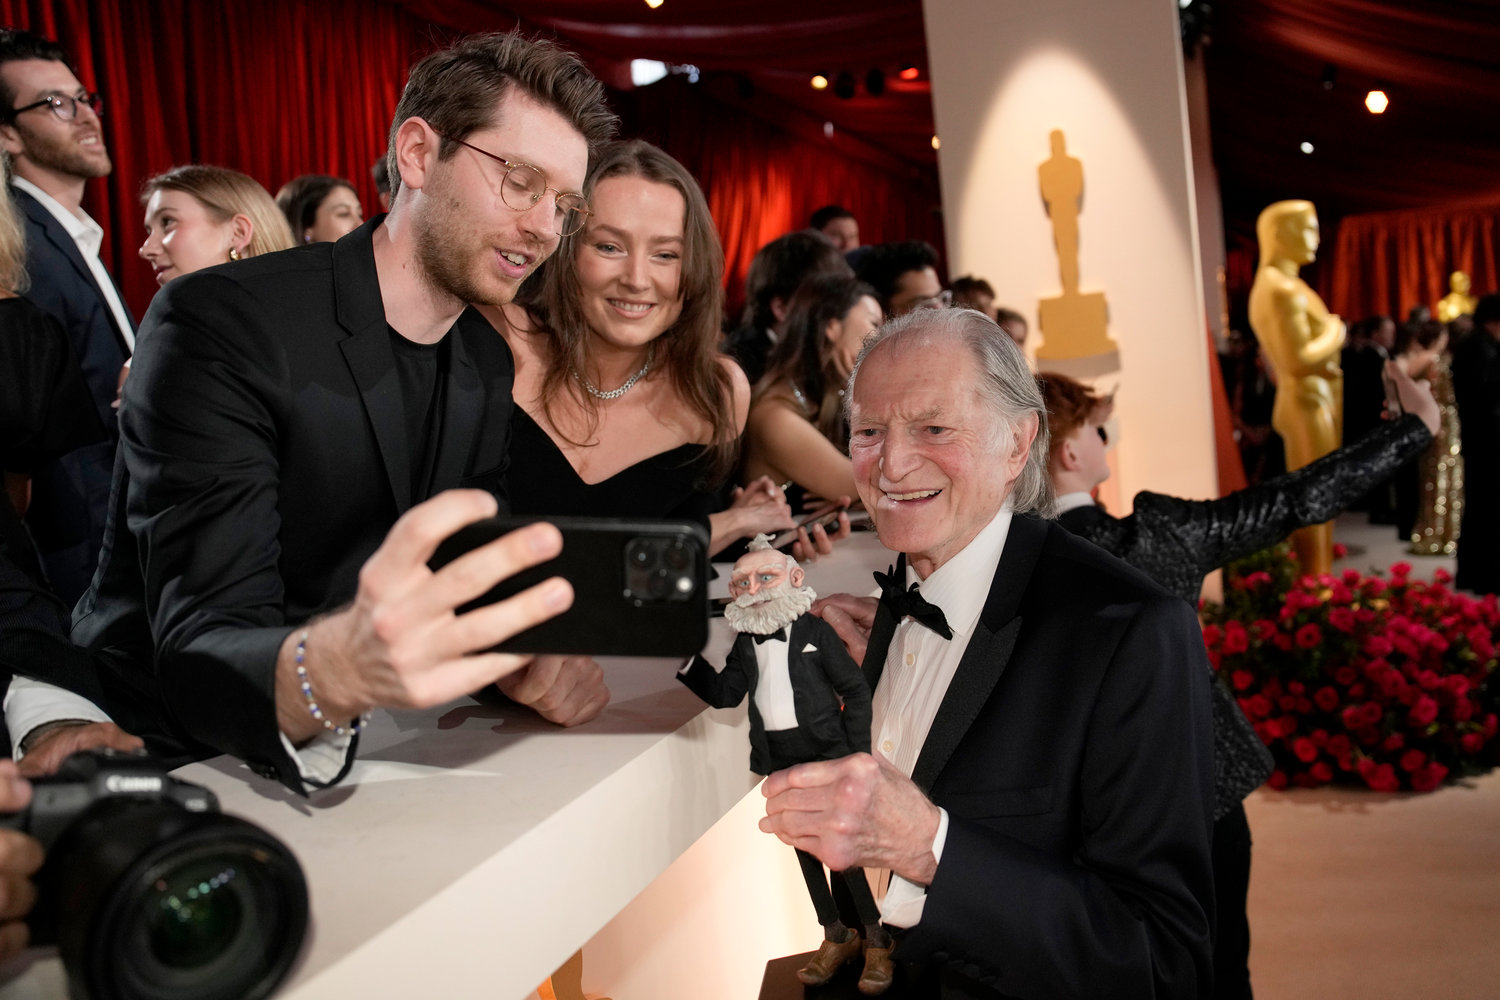 David Bradley poses for a selfie with fans at the Oscars on Sunday, March 12, 2023, at the Dolby Theatre in Los Angeles. (AP Photo/John Locher)